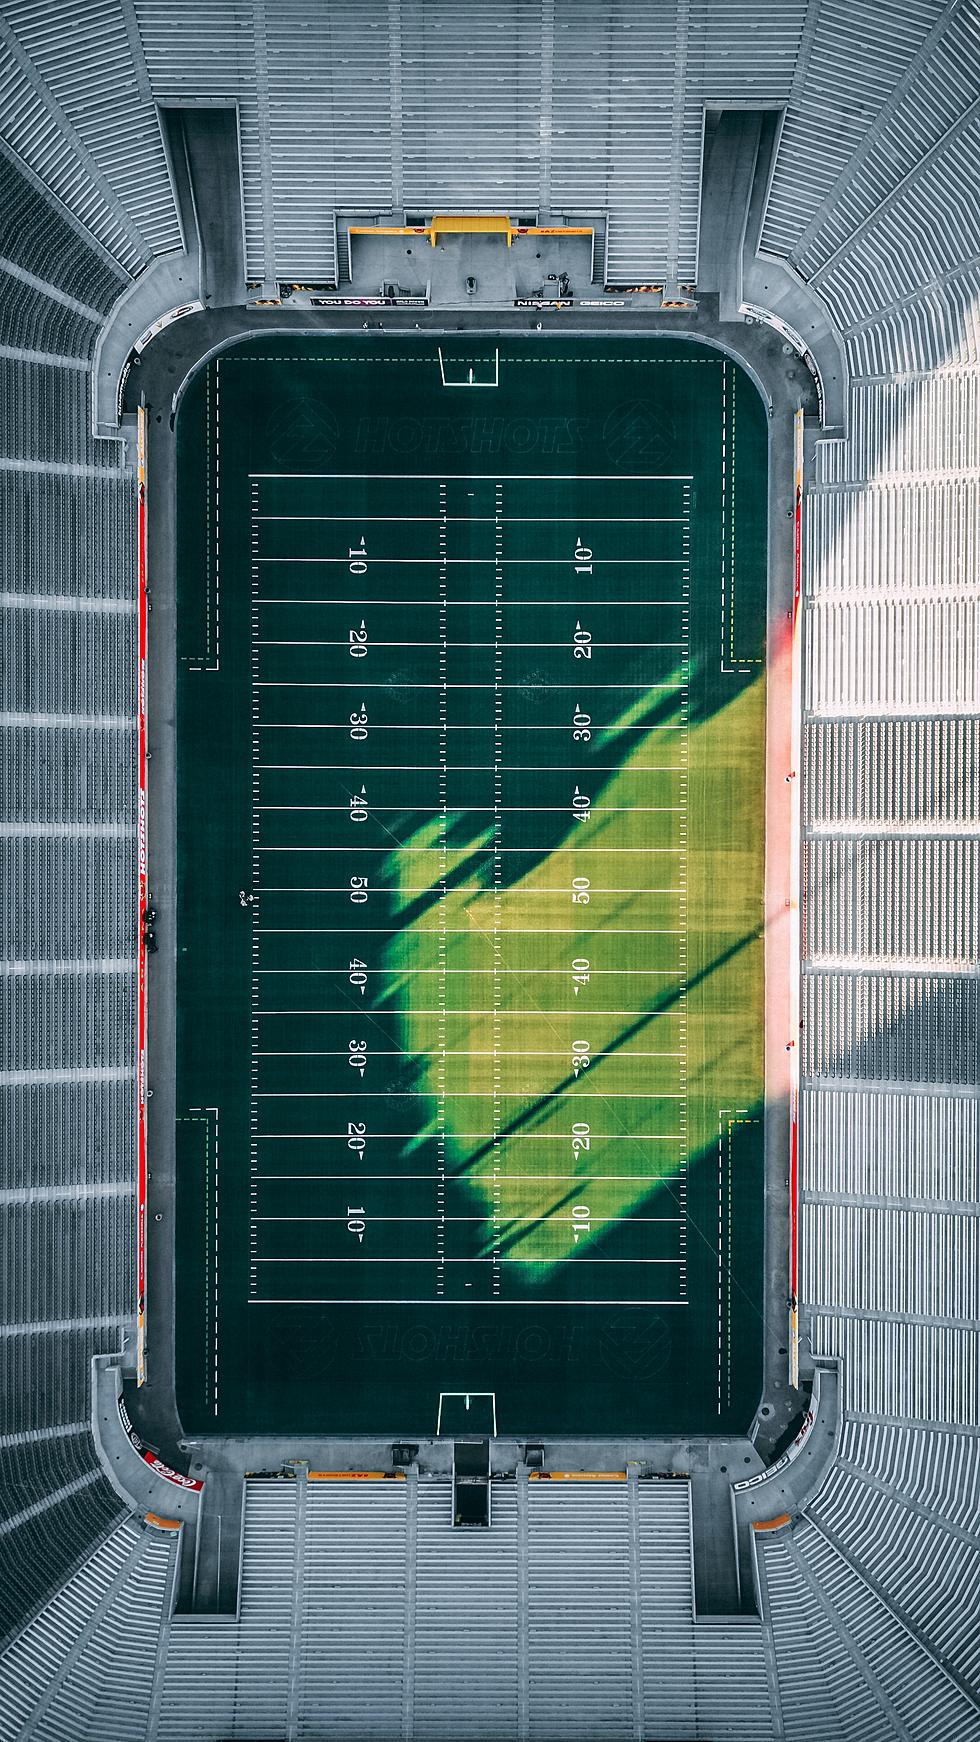 VIDEO: Montana’s Bobcat Stadium From Above. Looks Pretty Awesome